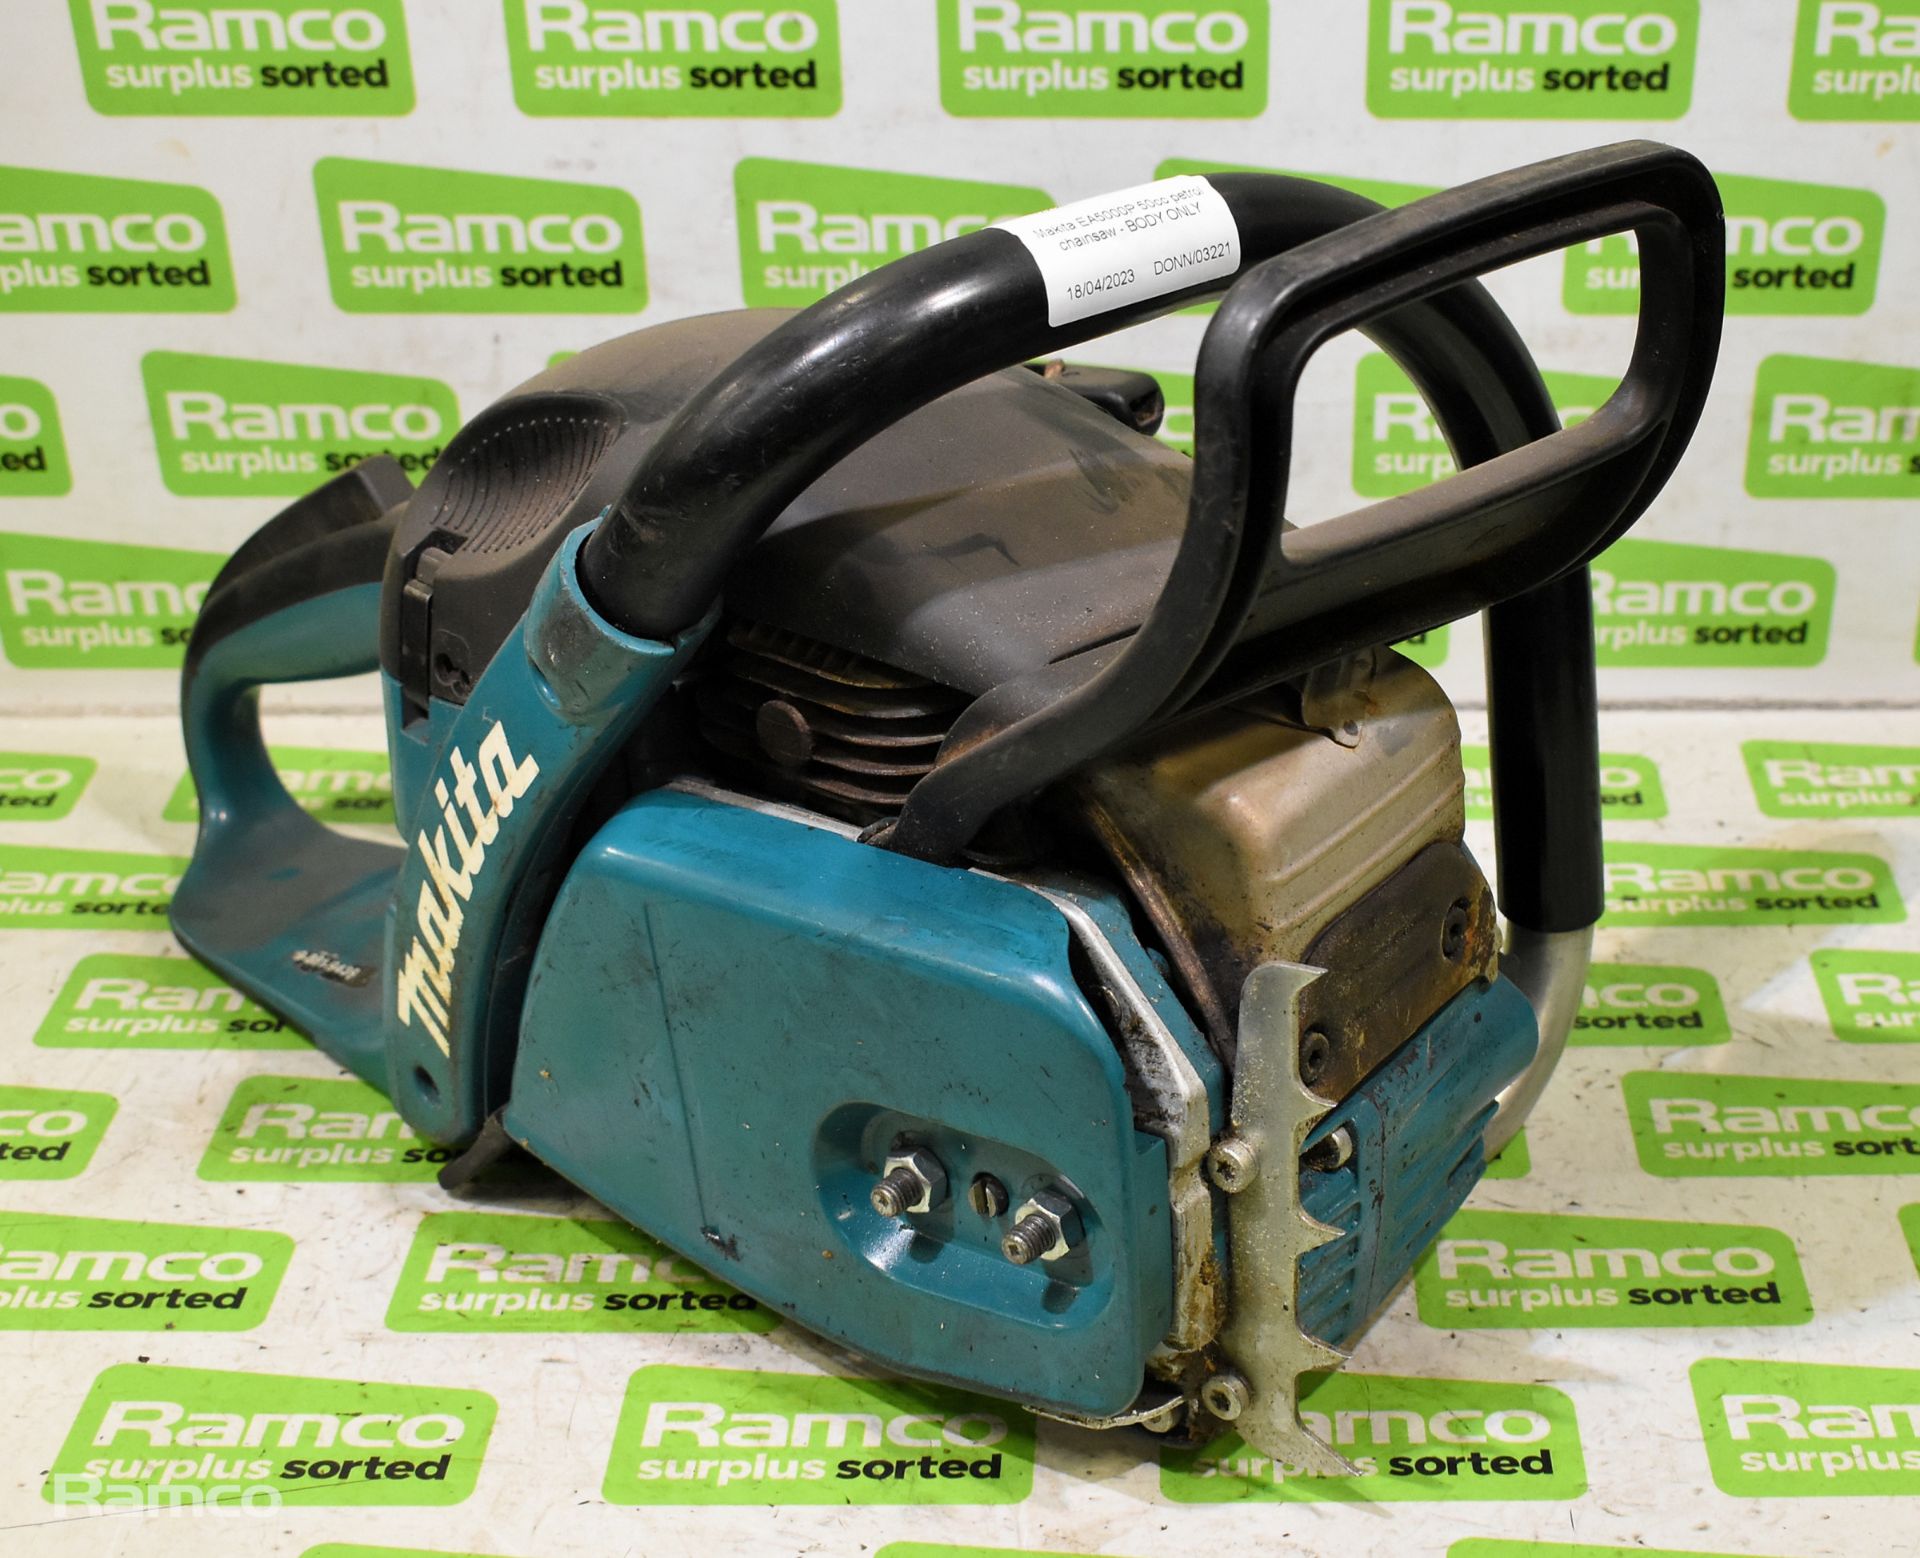 Makita DCS5030 50cc petrol chainsaw with guide and chain - AS SPARES & REPAIRS - Image 7 of 7